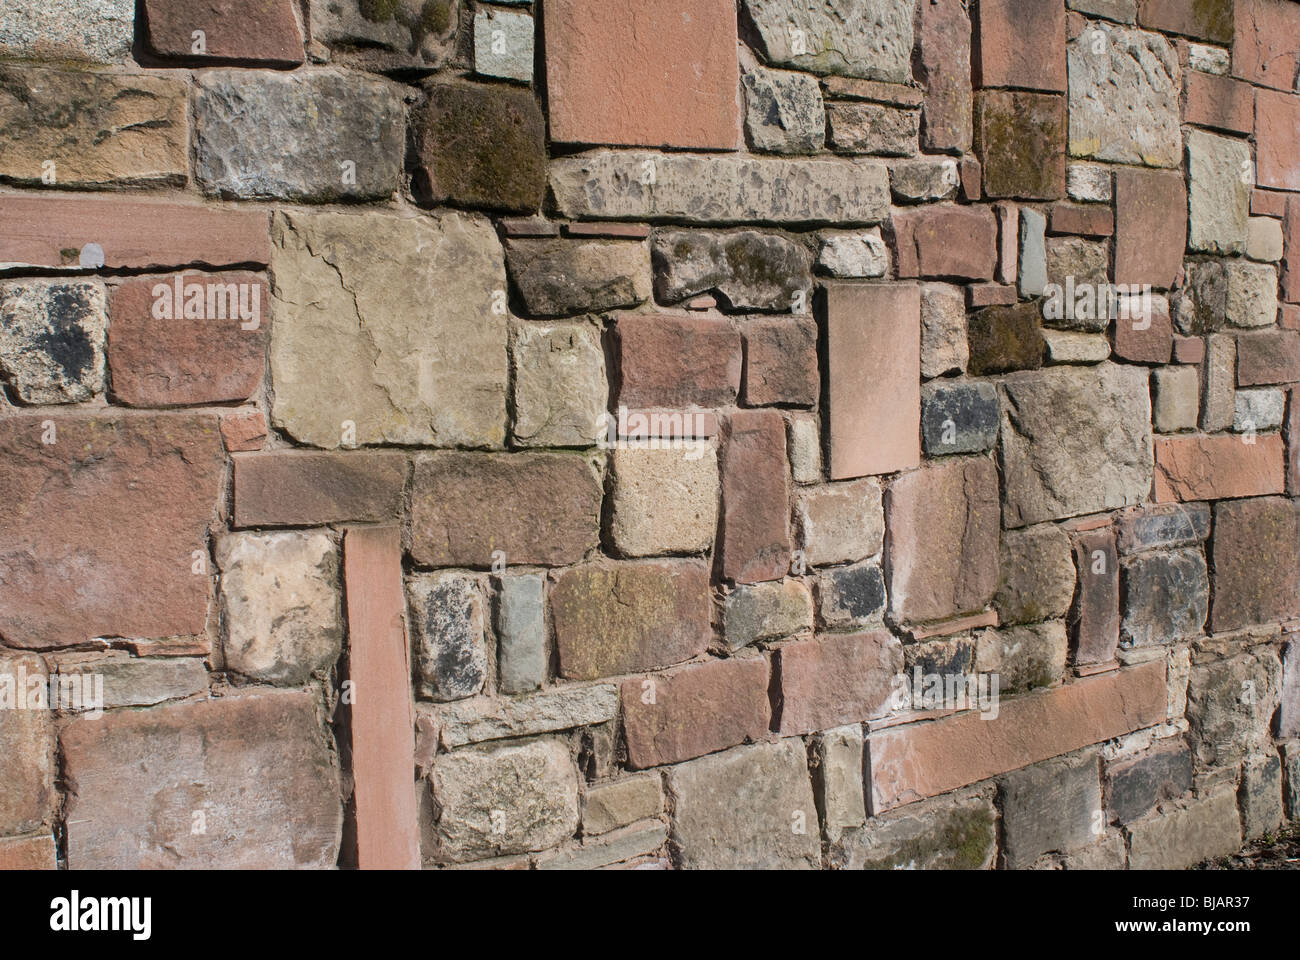 A solid stone wall made of sandstone limestone and granite. Stock Photo